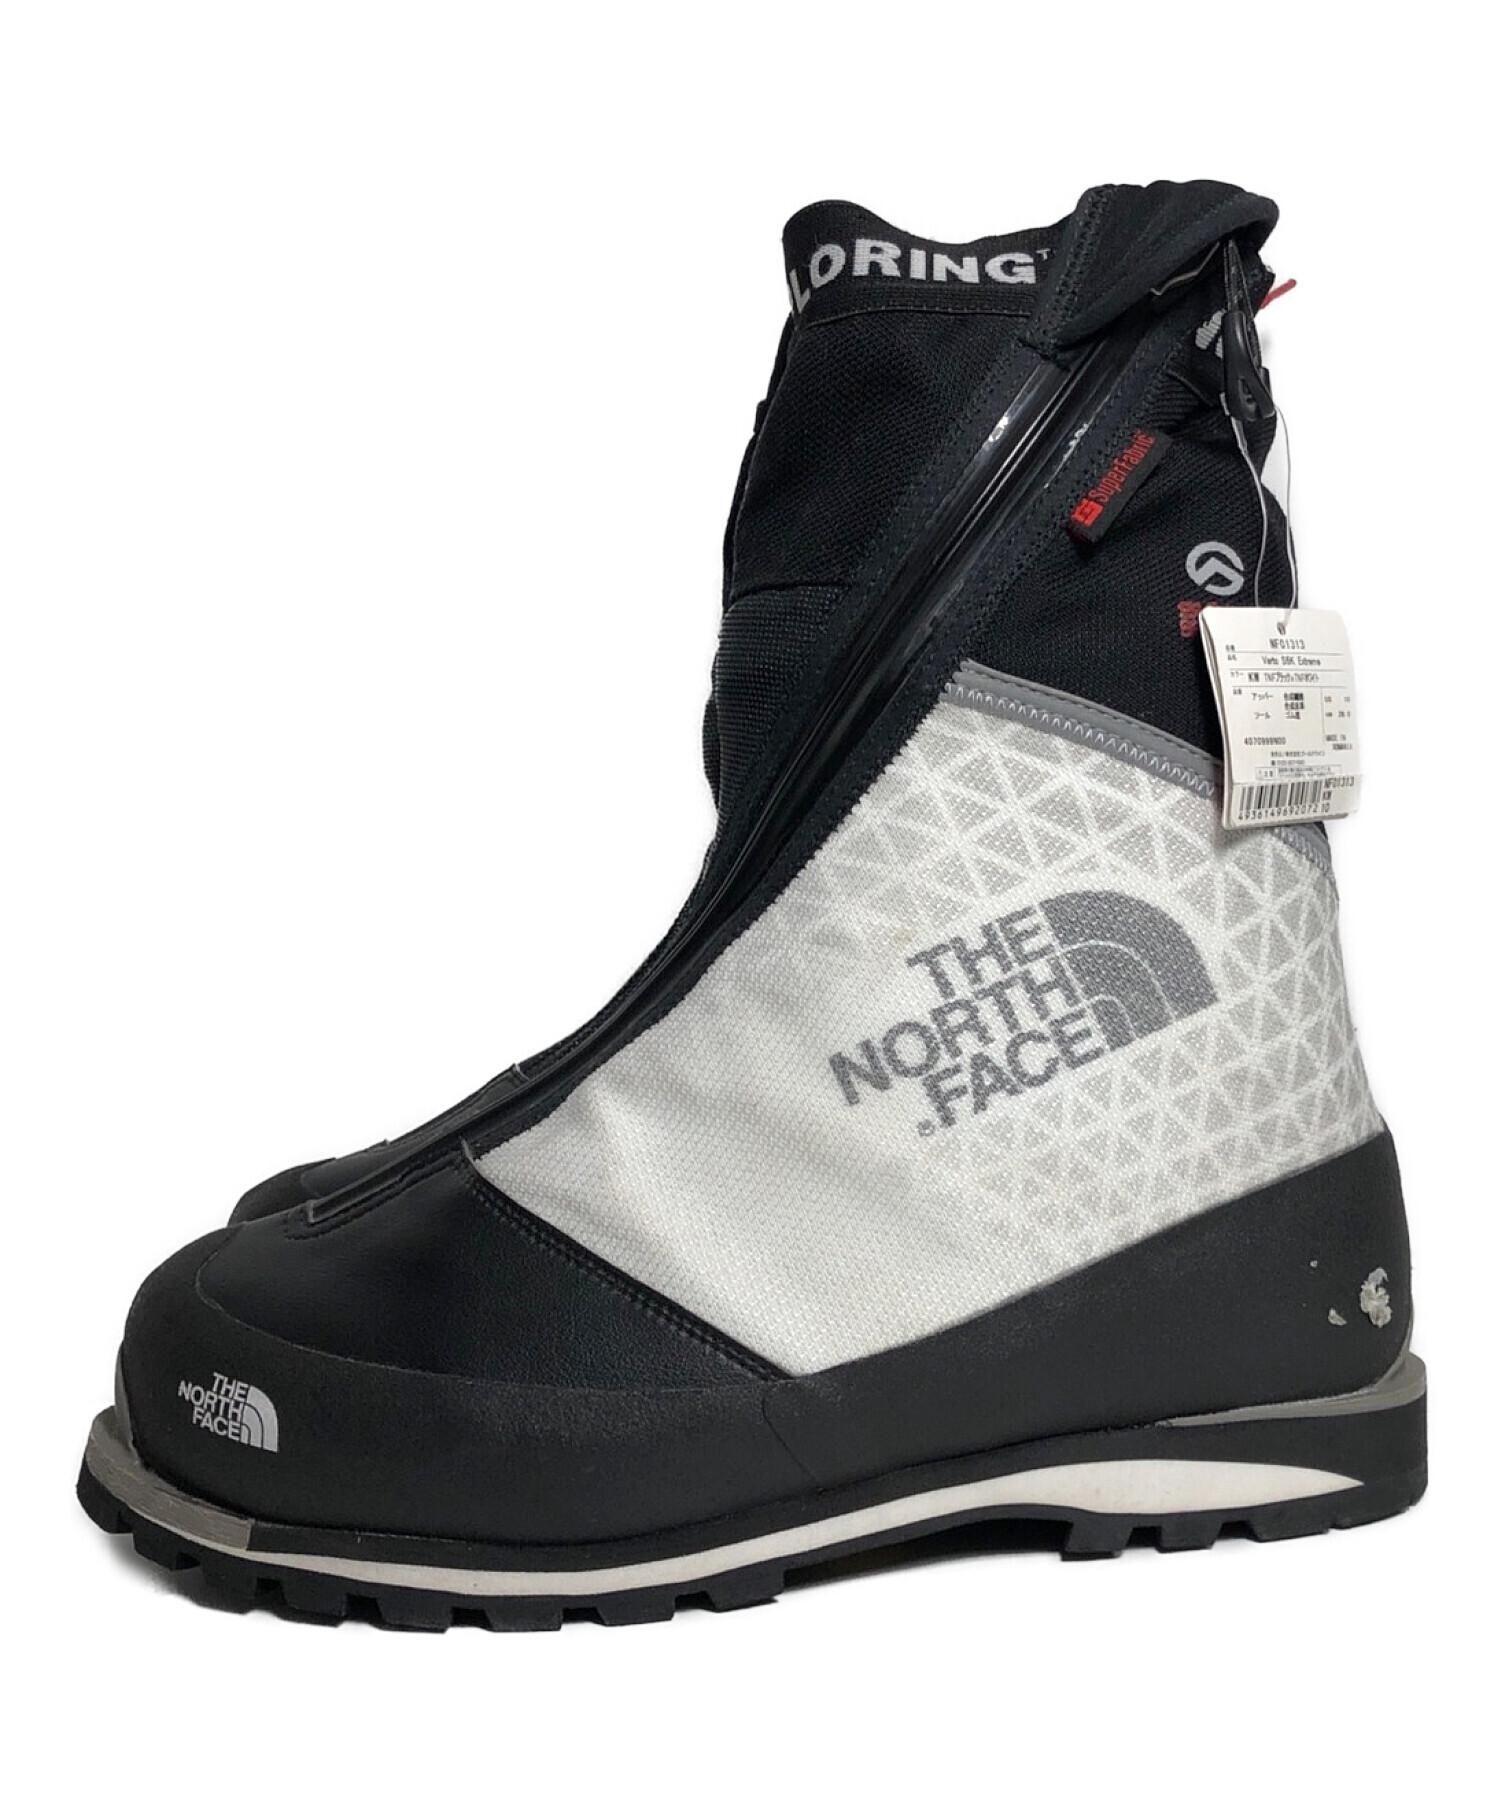 THE NORTH FACE Verto S6K Extreme 28 ブーツ